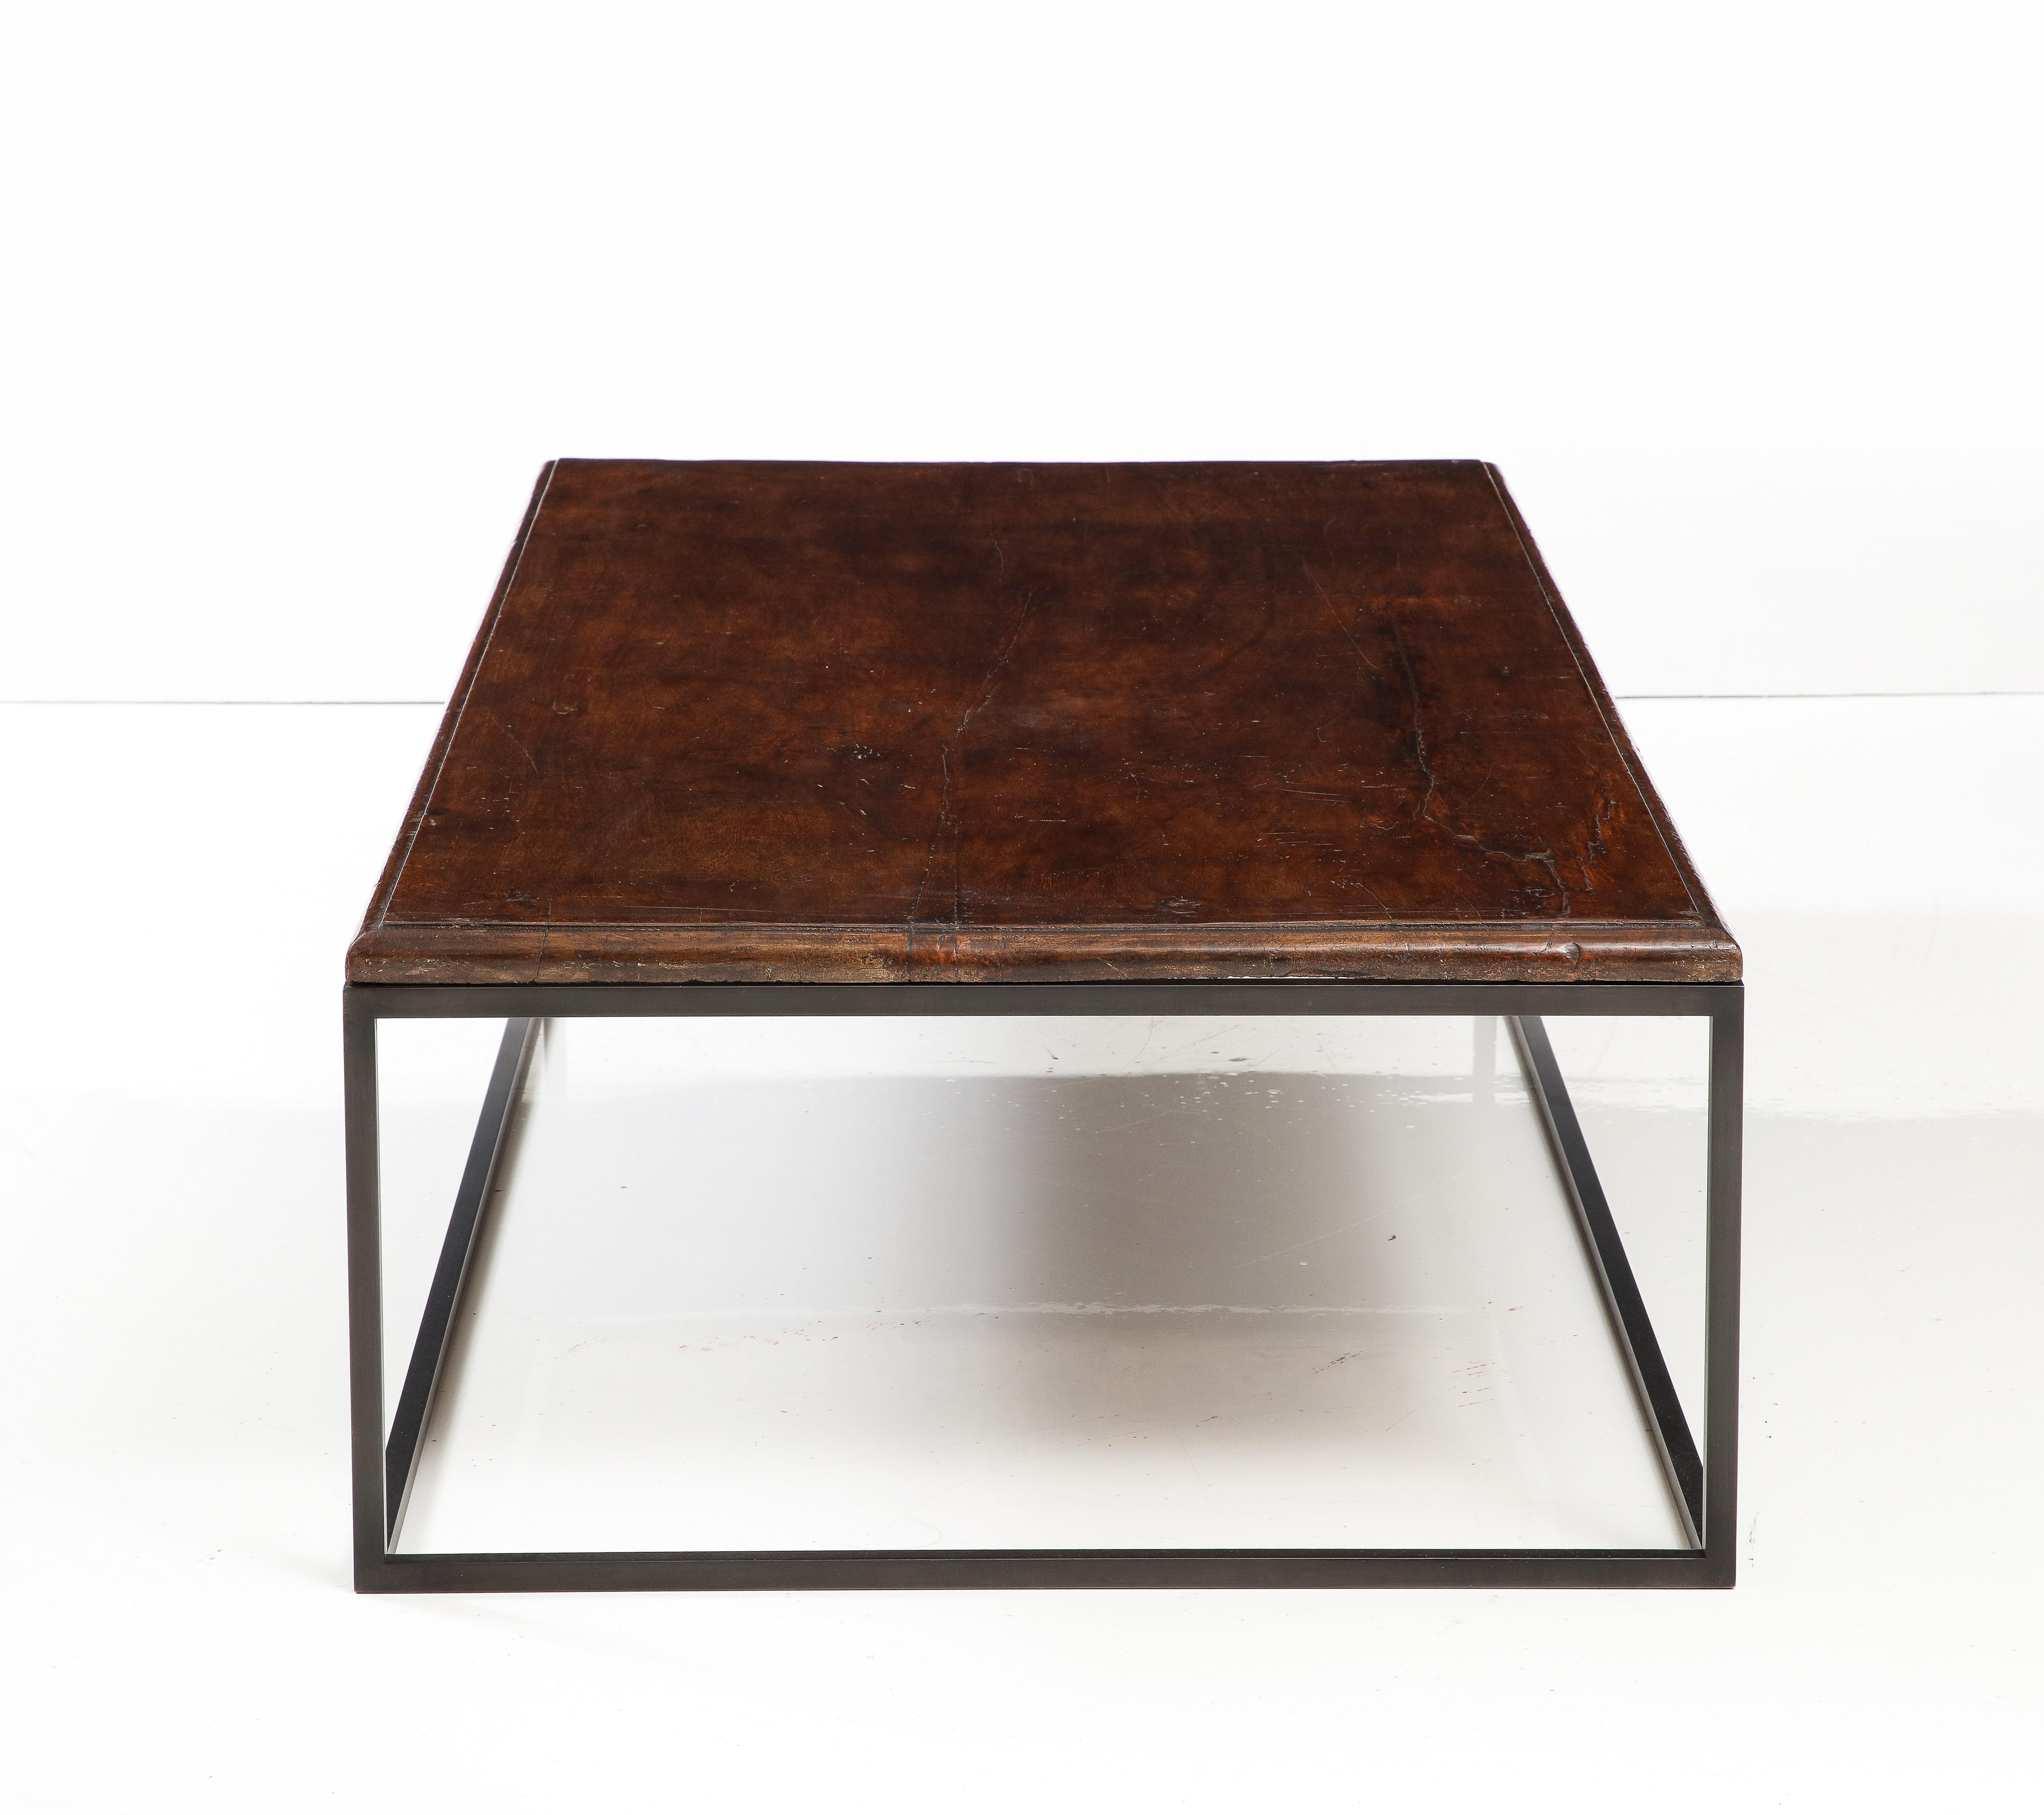 18th C. Italian Dark Walnut Coffee Table in One Thick Piece with Edge Detail For Sale 1